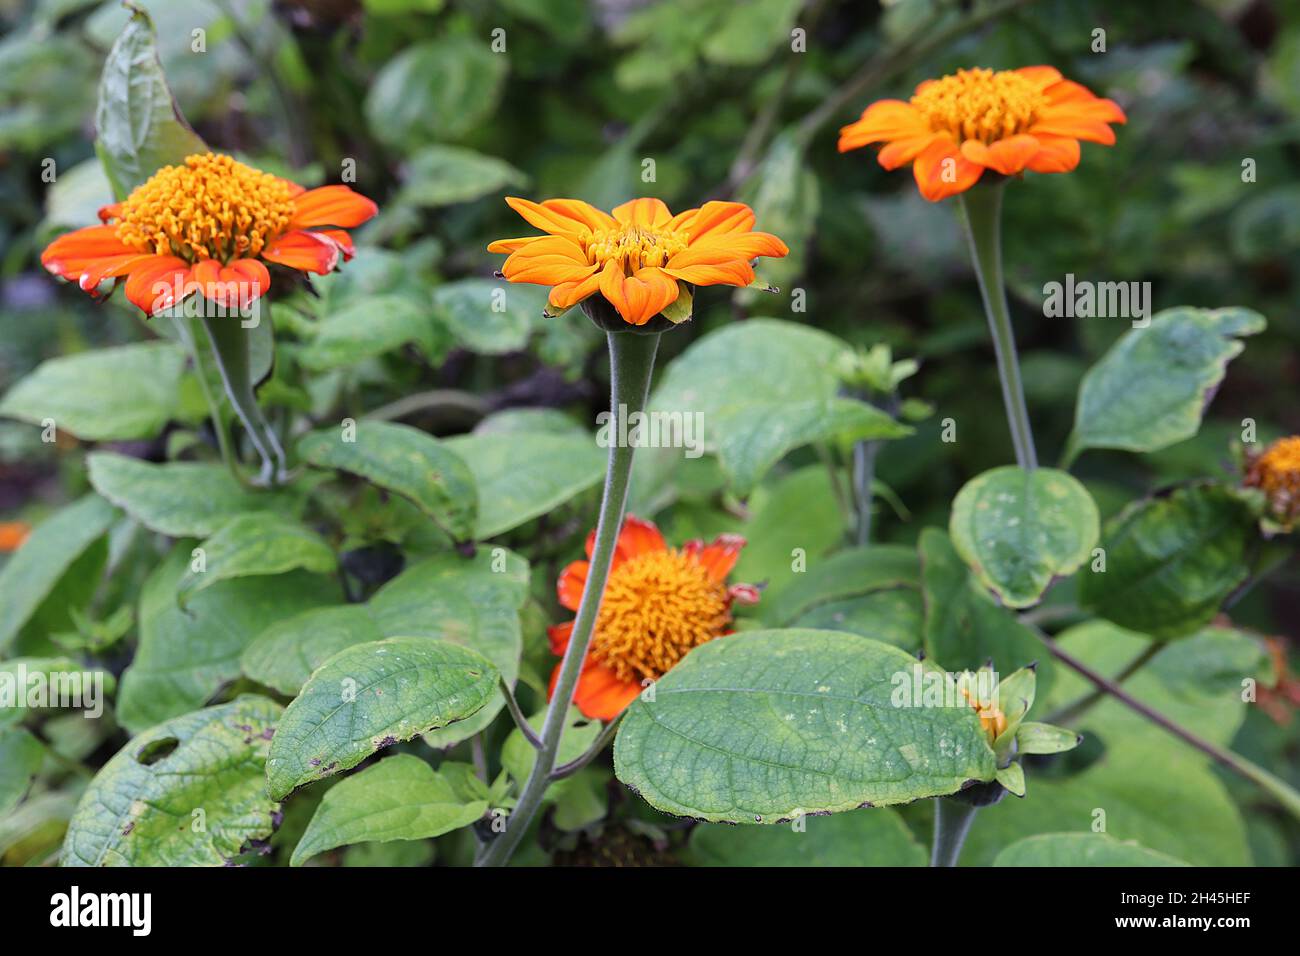 Tithonia rotundifolia ‘Torch’ Mexican sunflower Torch – bright orange daisy-like flowers and mid green broad ovate and deeply lobed leaves,  October, Stock Photo